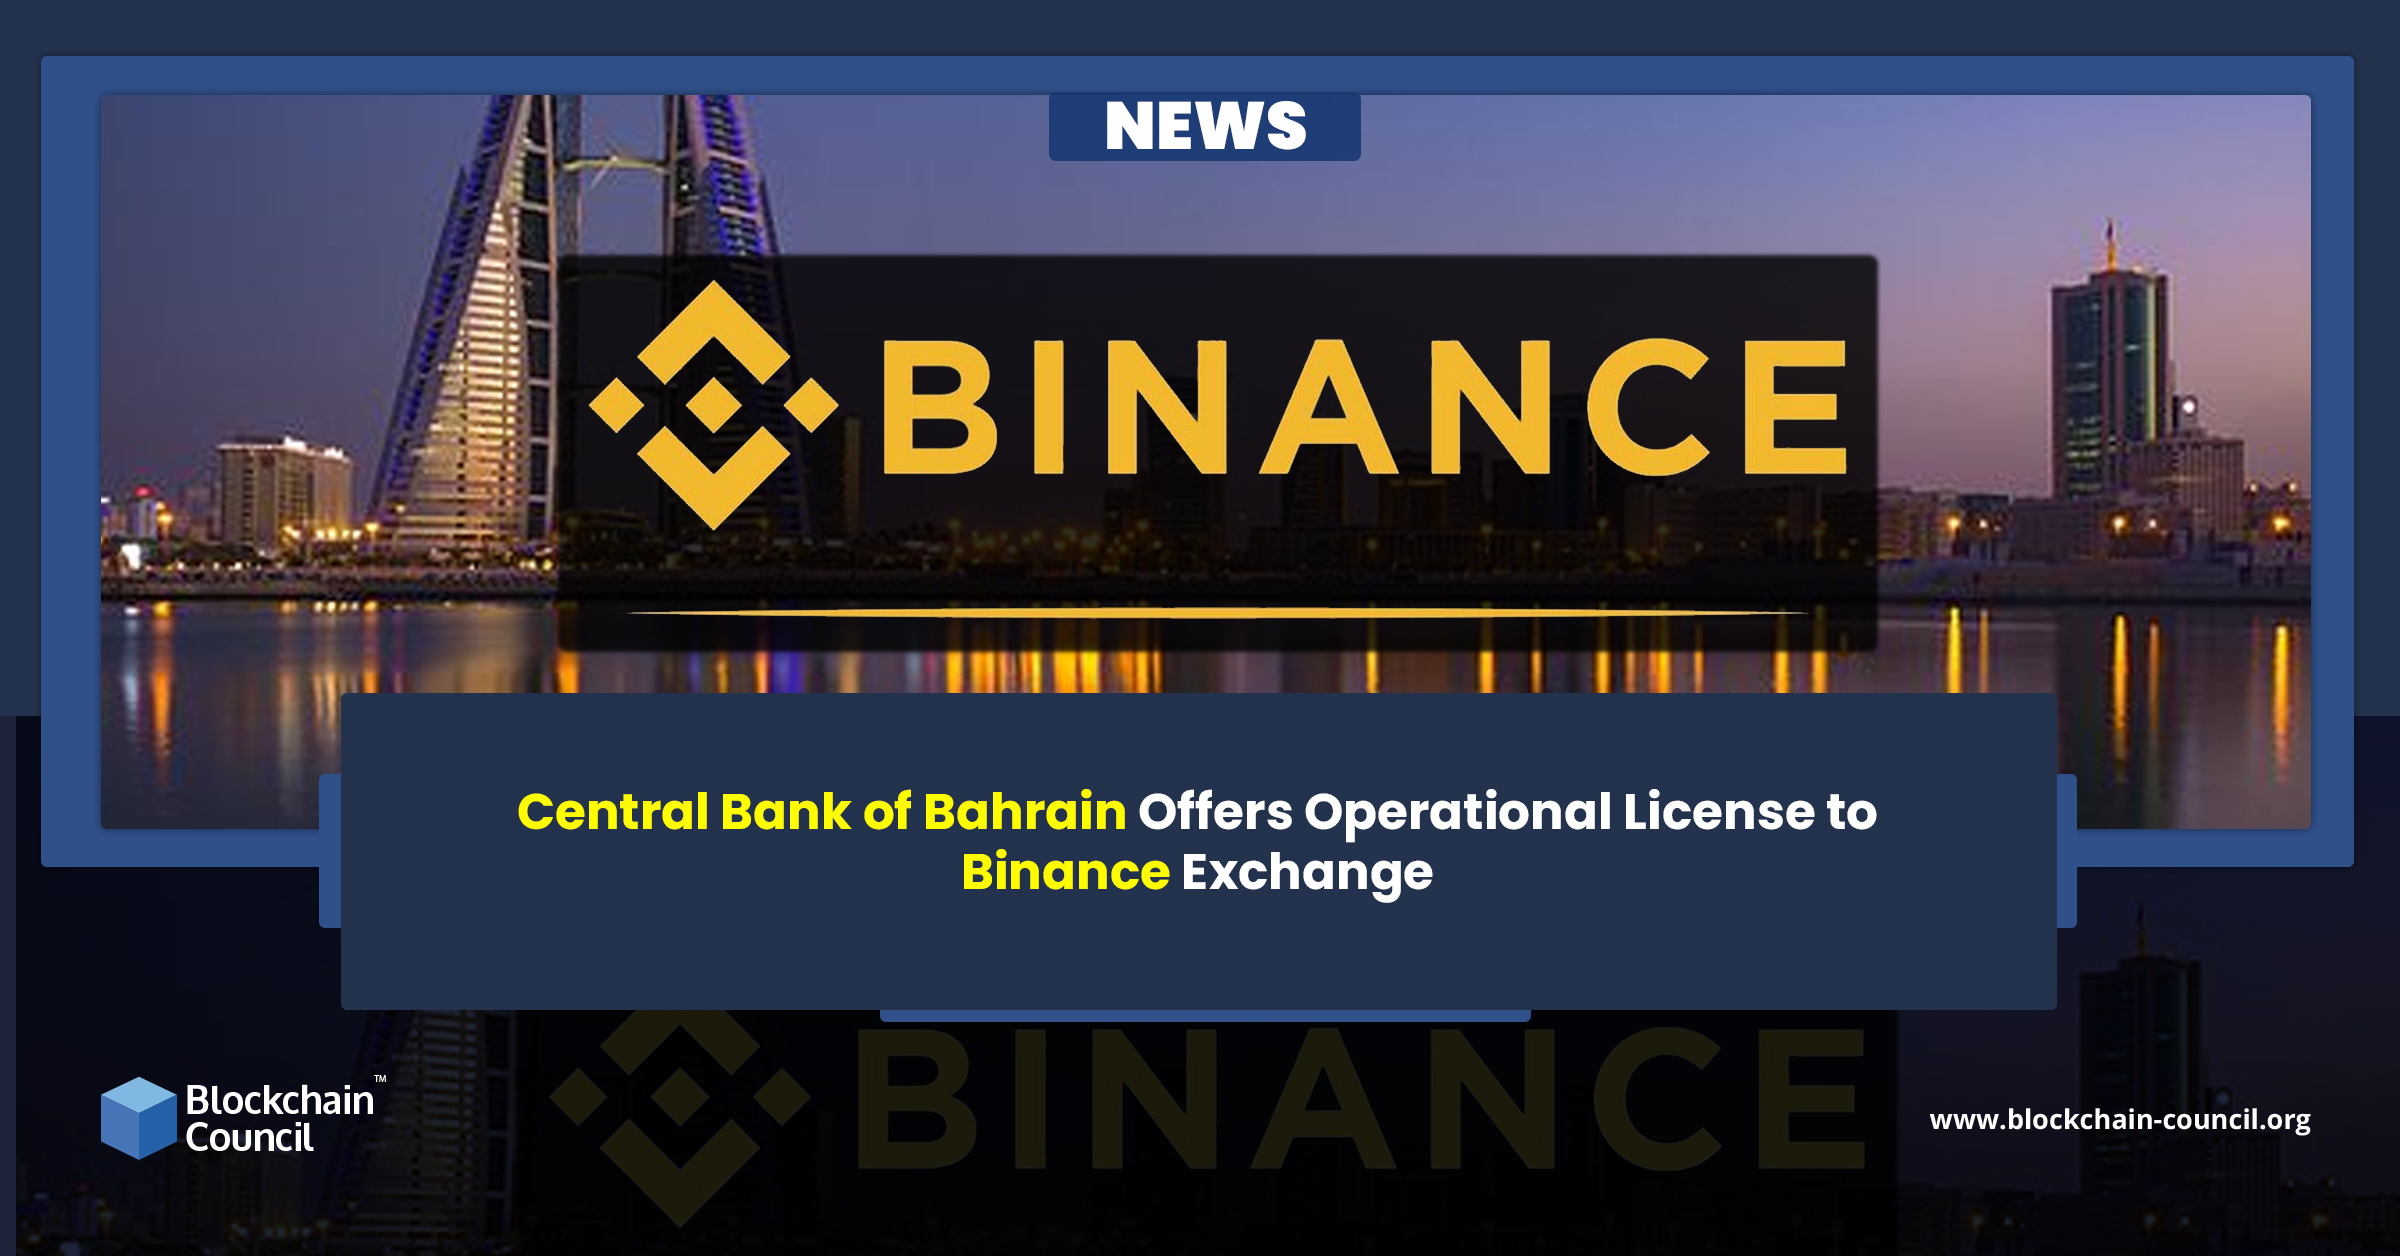 Central Bank of Bahrain Offers Operational License to Binance Exchange